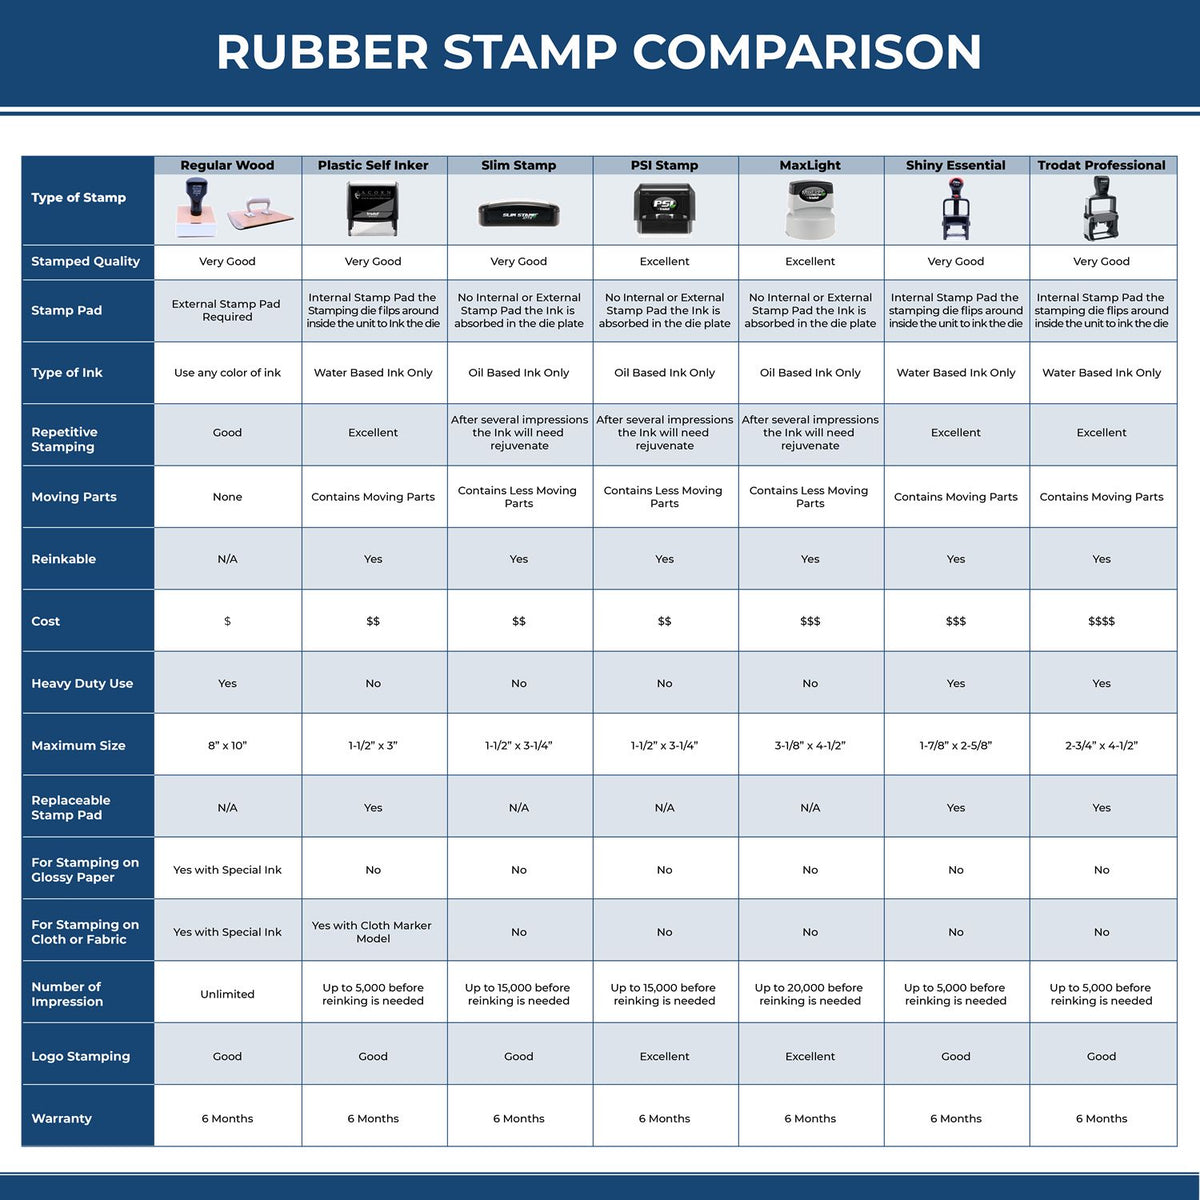 A comparison chart for the different types of mount models available for the PSI Guam Notary Stamp.